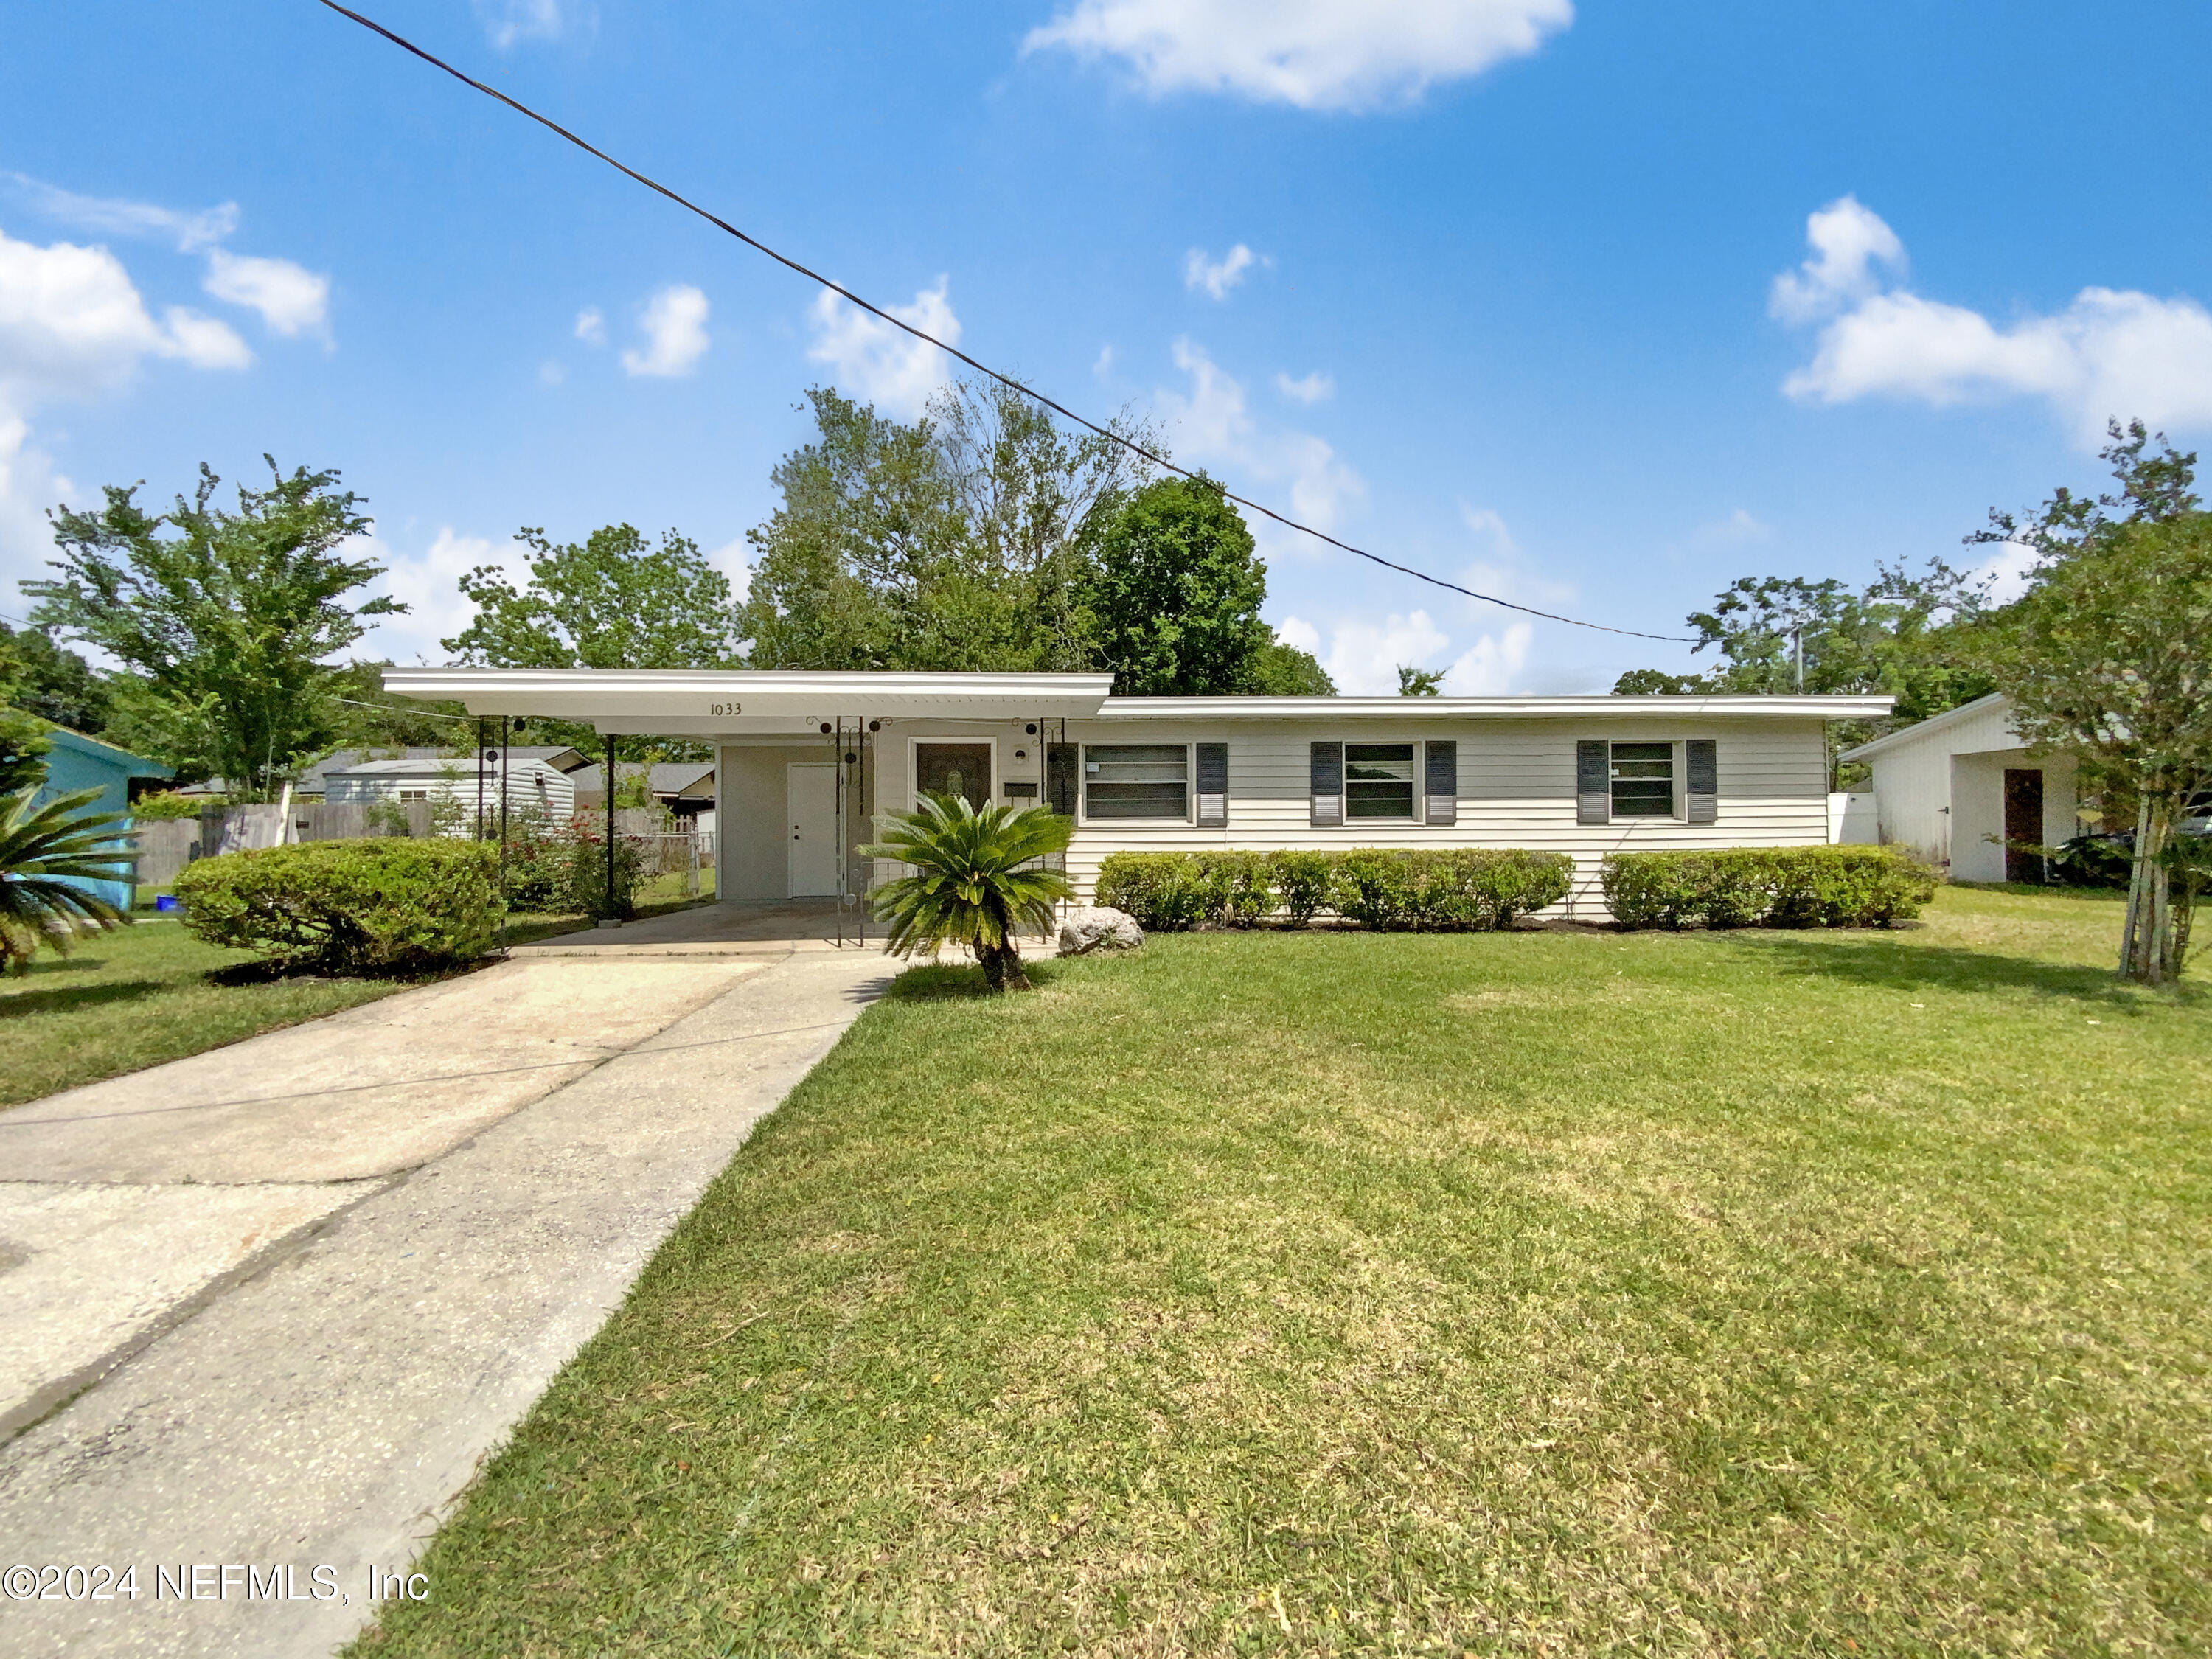 Jacksonville, FL home for sale located at 1033 Melson Avenue, Jacksonville, FL 32254